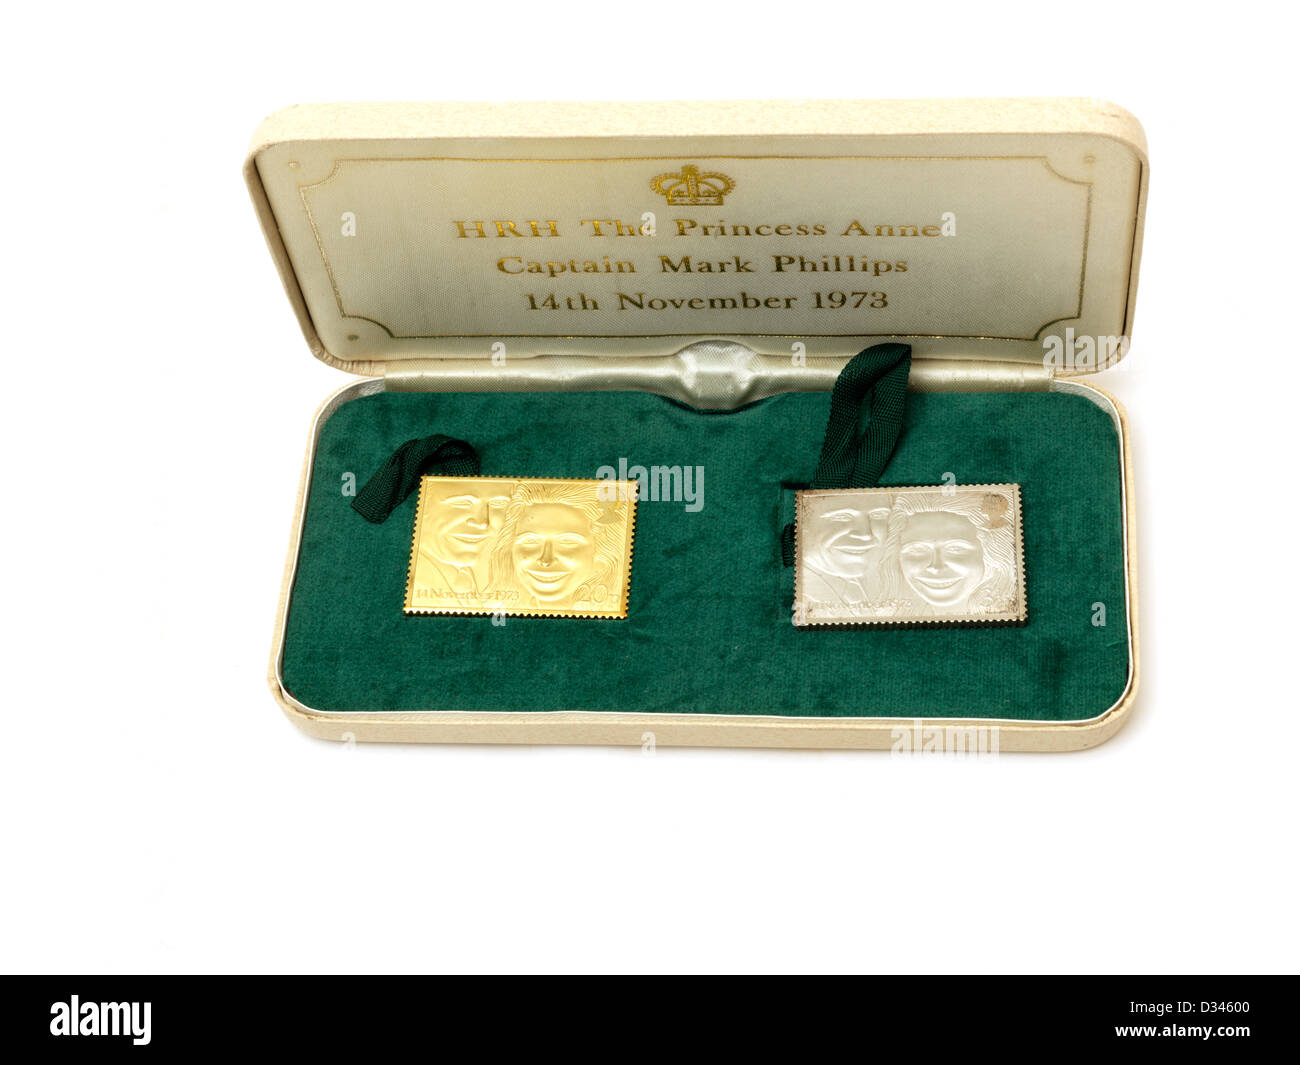 Gold And Silver Stamps Commemorating Princess Anne and Captain Mark Phillips 1973 Hallmark Replicas Stock Photo